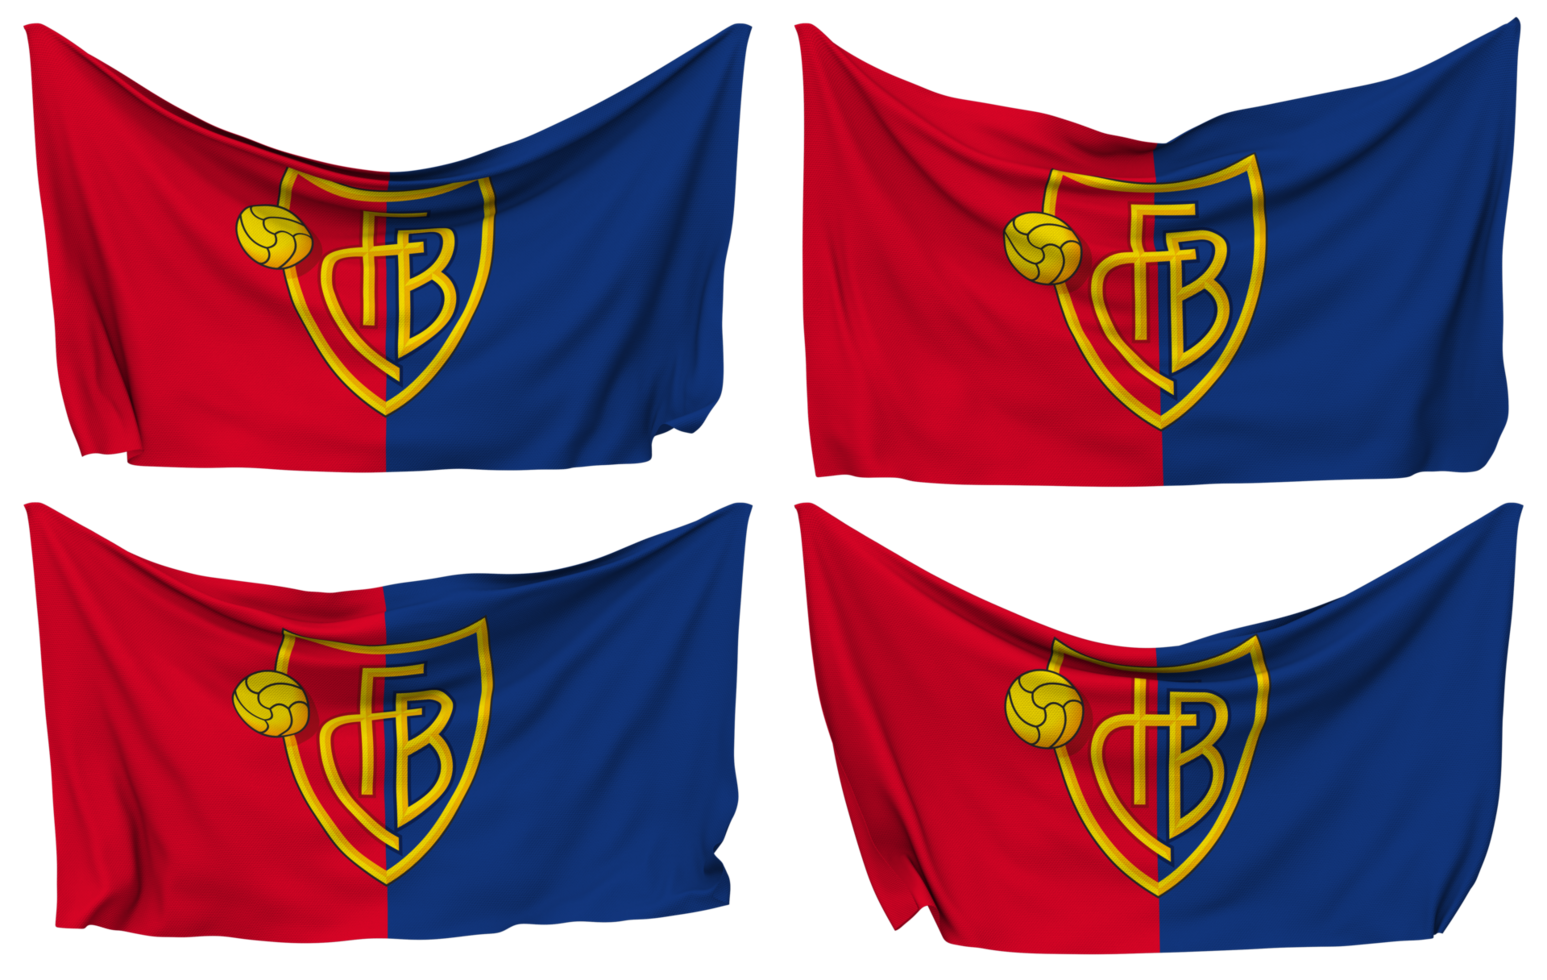 Fussball Club Basel 1893, FCB Pinned Flag from Corners, Isolated with Different Waving Variations, 3D Rendering png